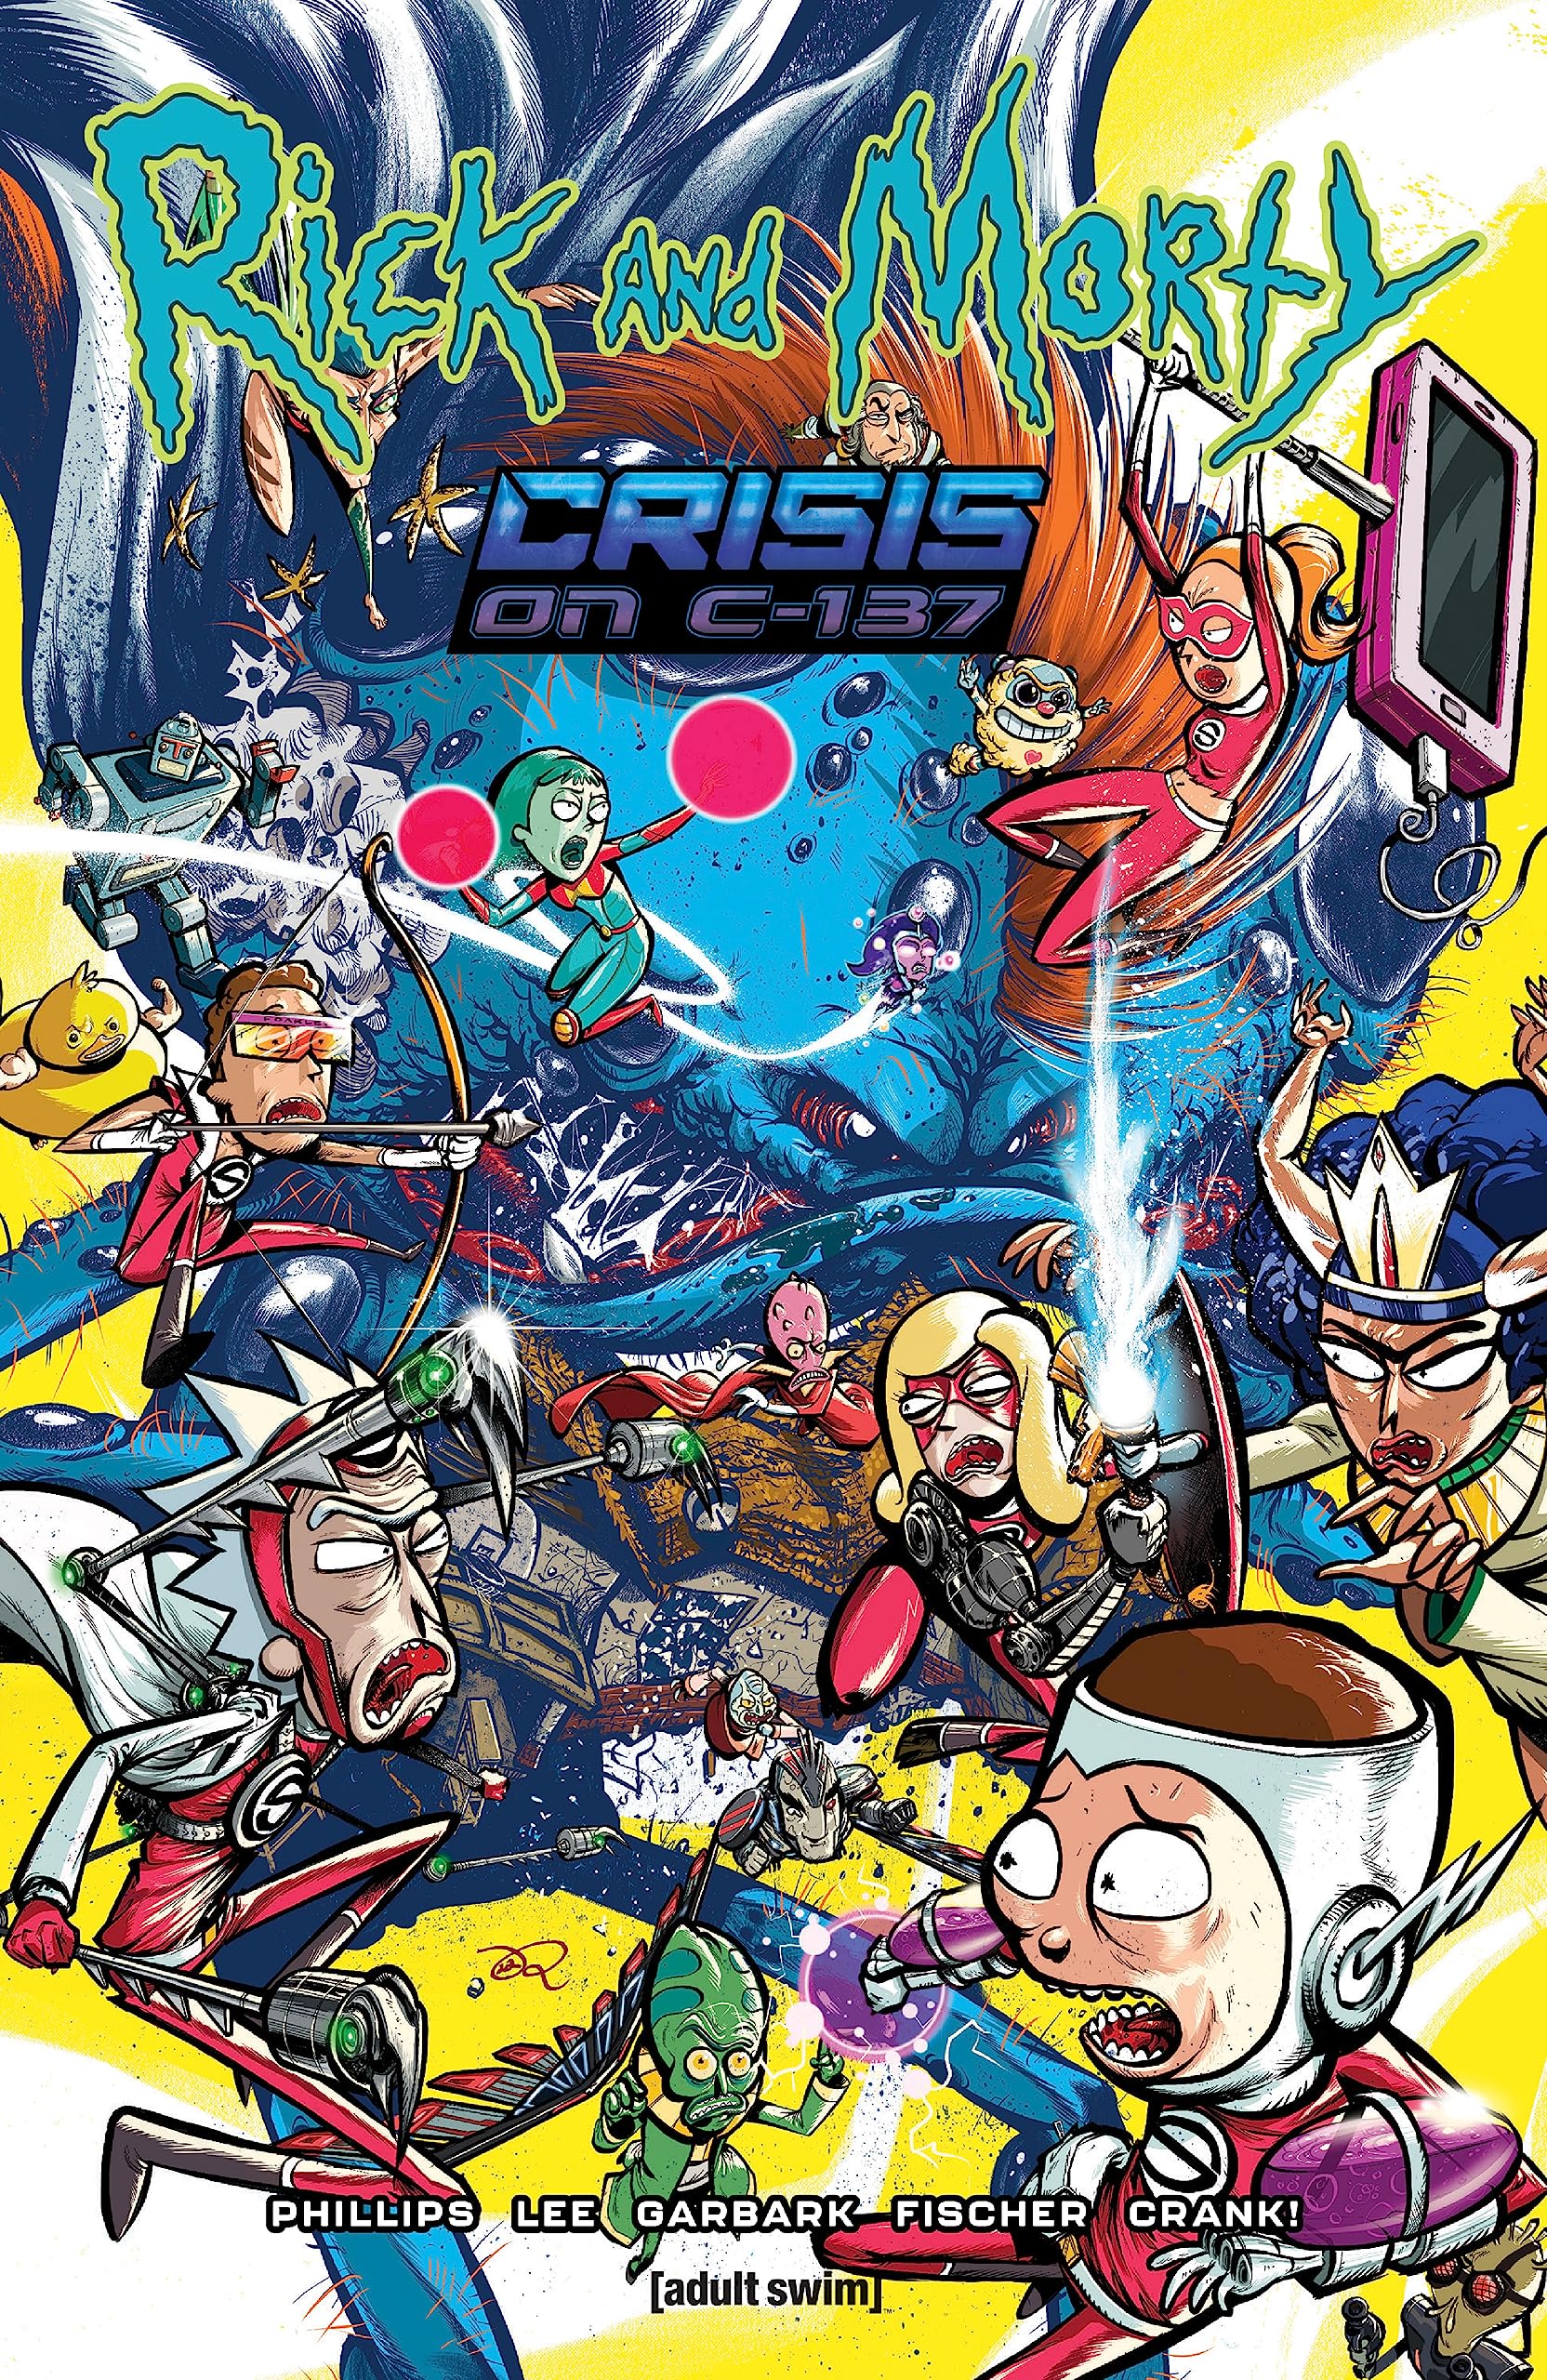 Read online Rick and Morty: Crisis on C-137 comic -  Issue # TPB - 1